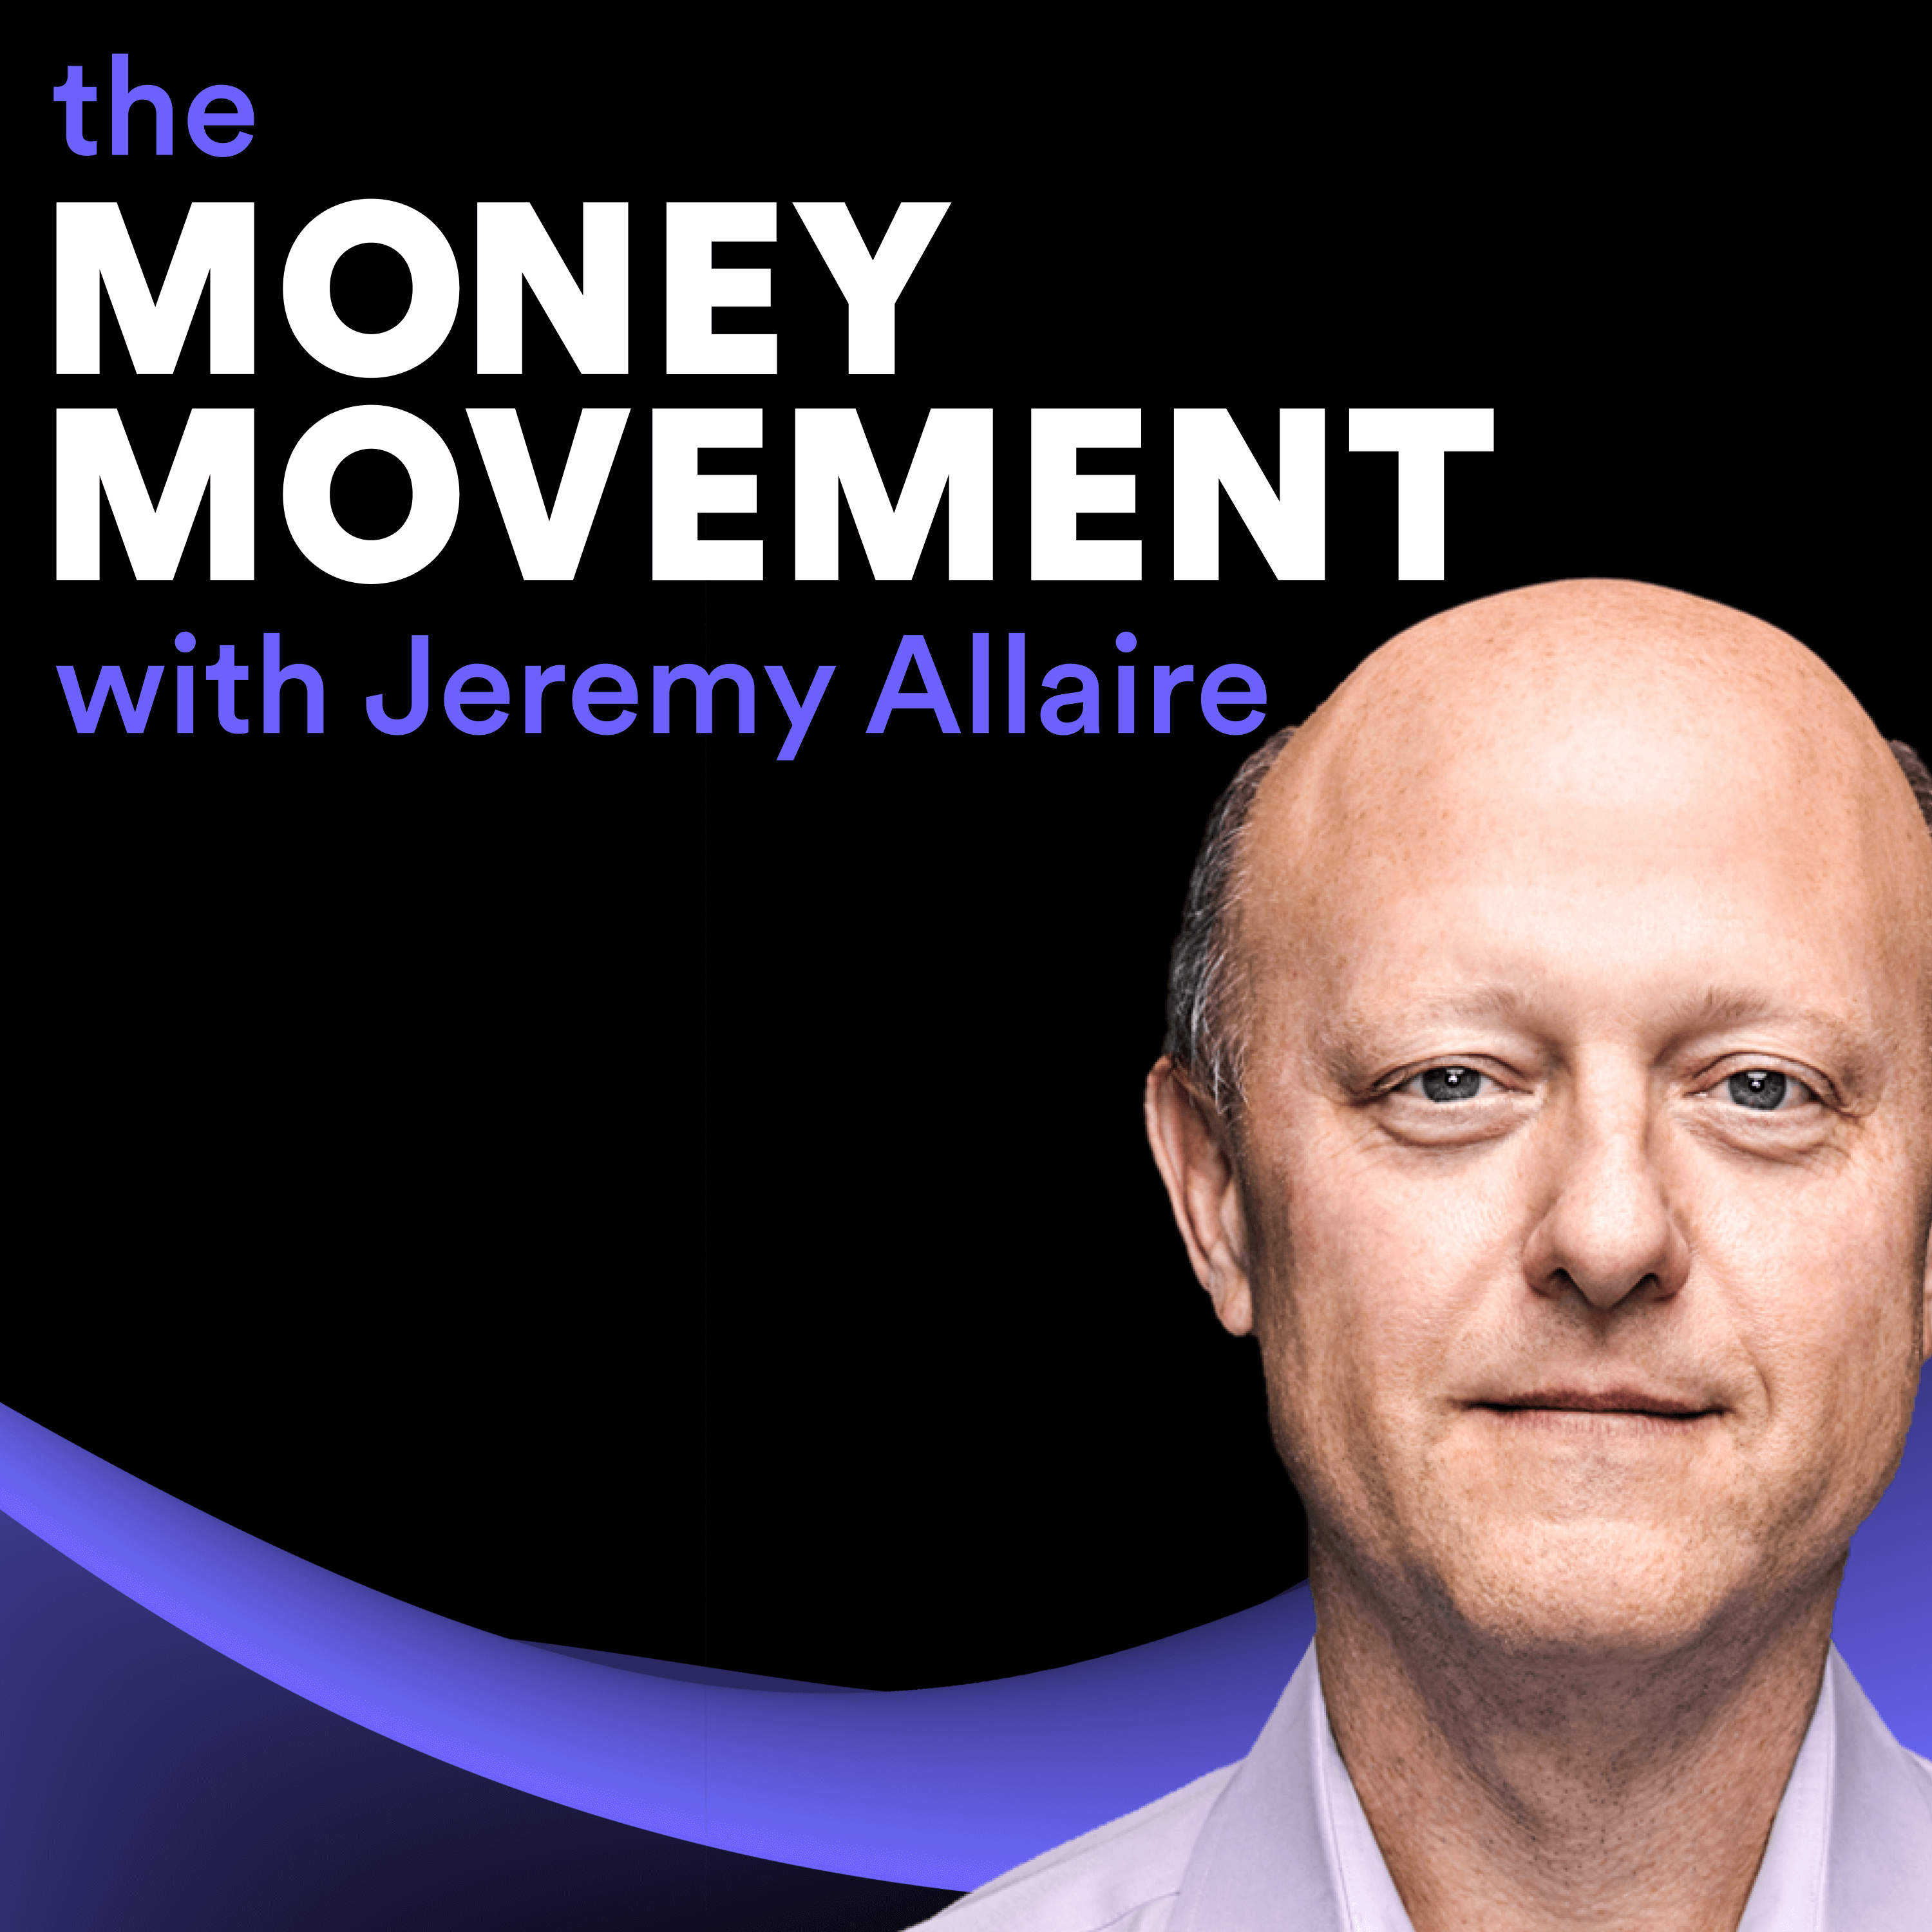 Ep 58 | Digital Money Comes of Age with Dante Disparte of Circle